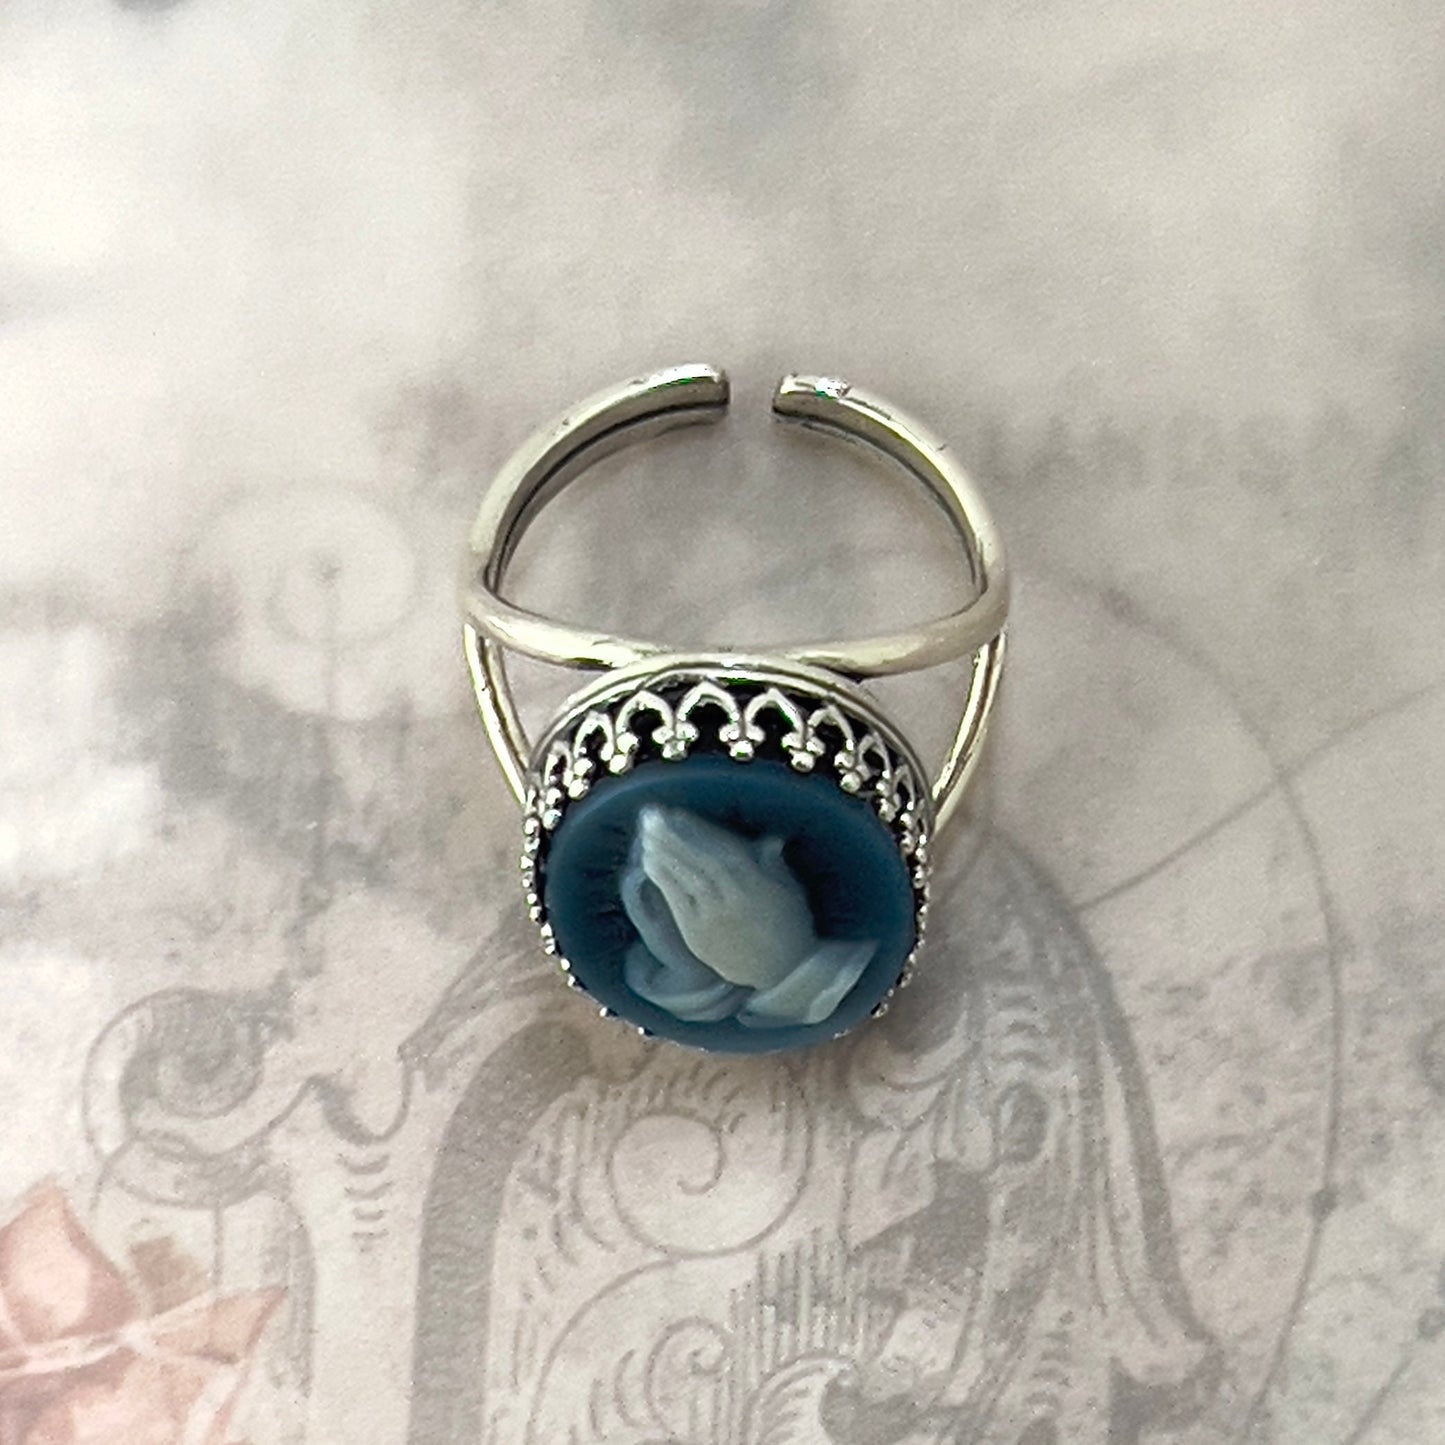 Blue Agate Cameo Ring, Christian Jewelry, Praying Hands Adjustable Sterling Silver Ring, Religious Gift